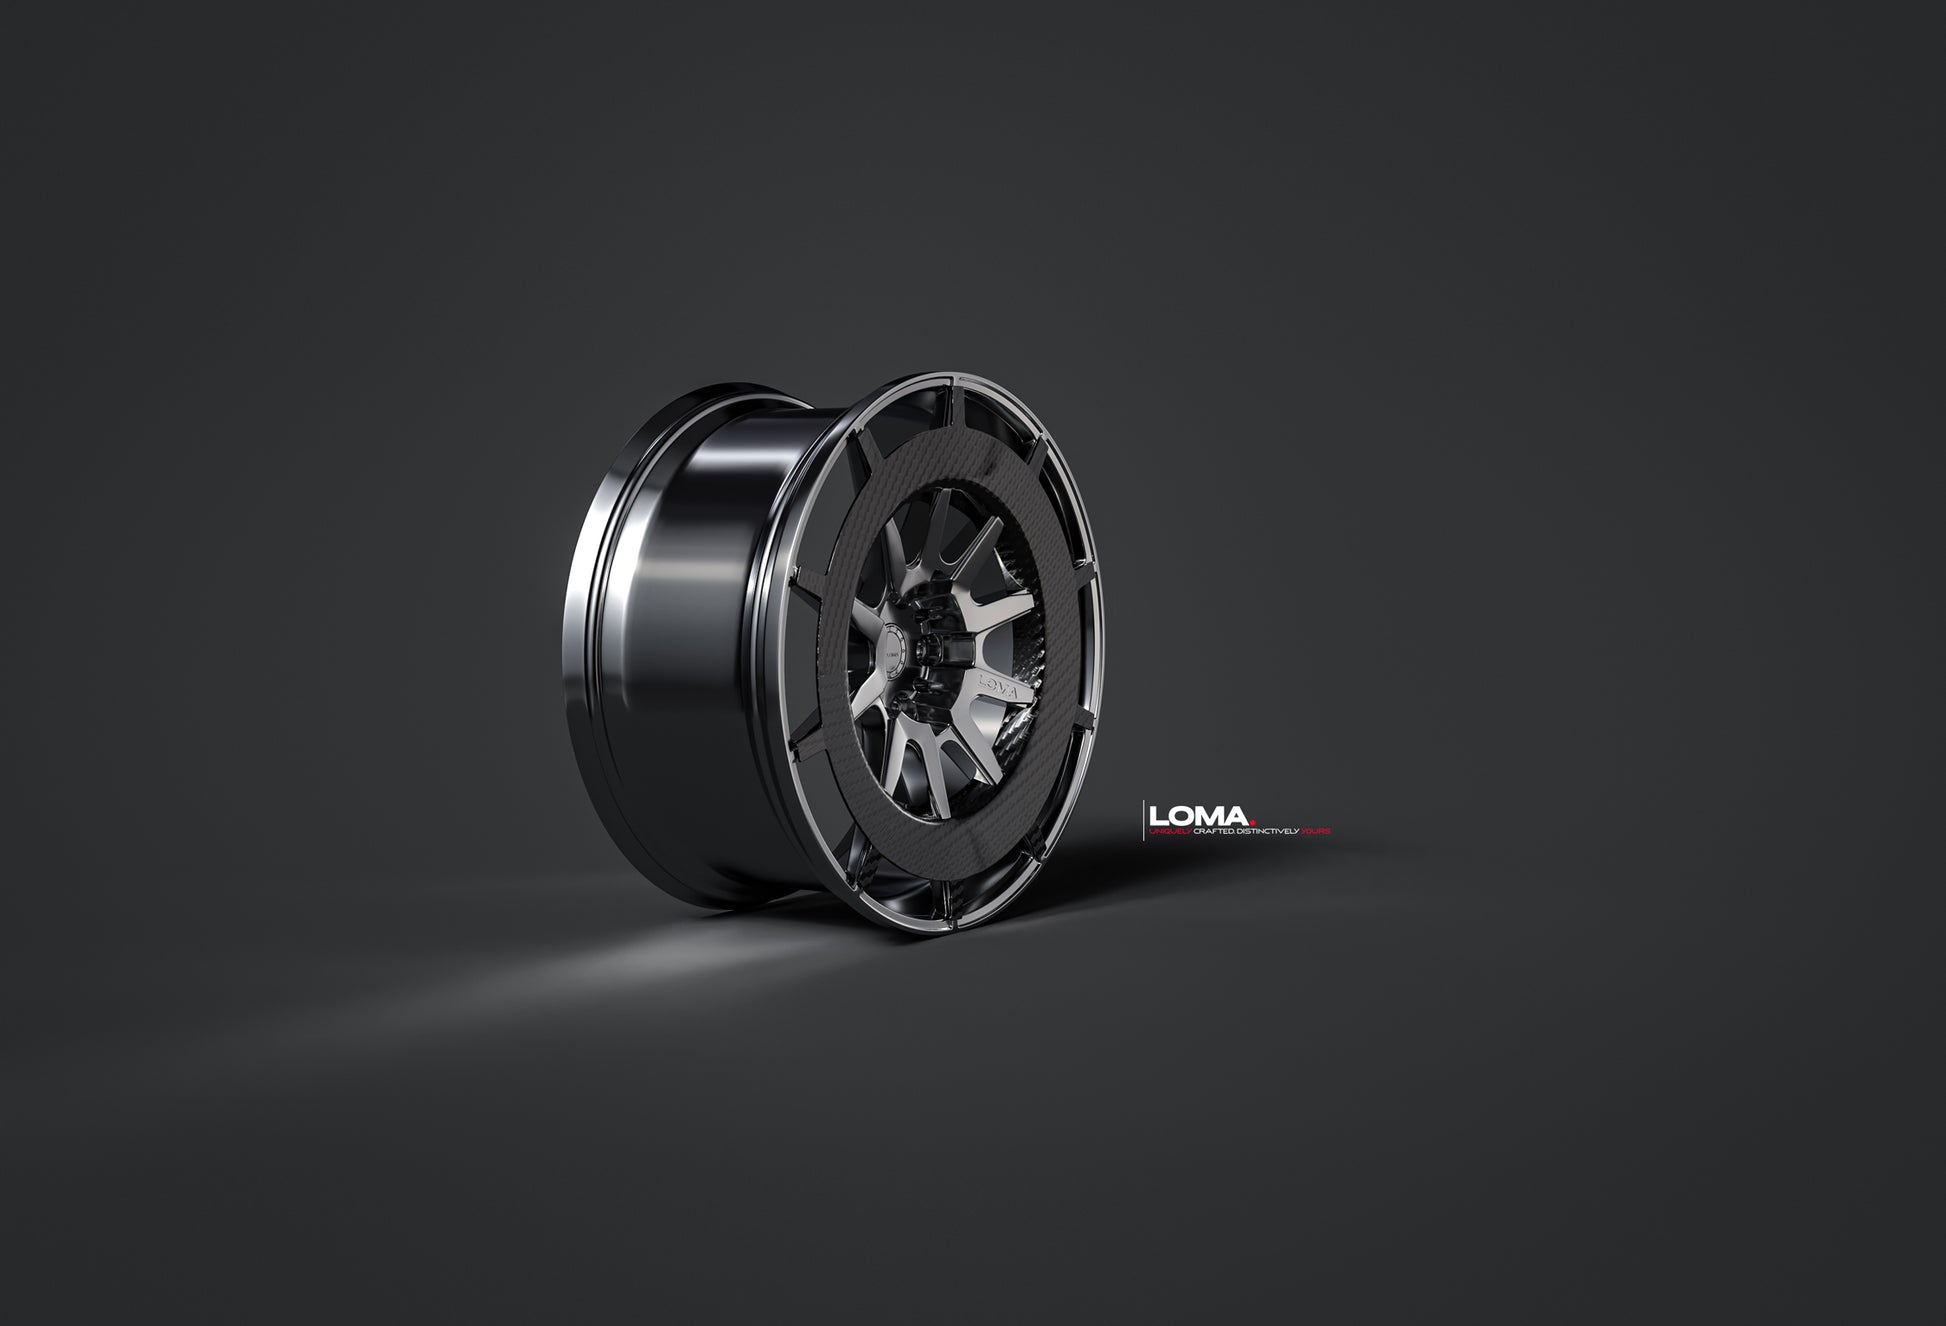 LOMA Forged LF-10C Wheels | Frozen Piano Black with Gloss Carbon Fiber profile view.